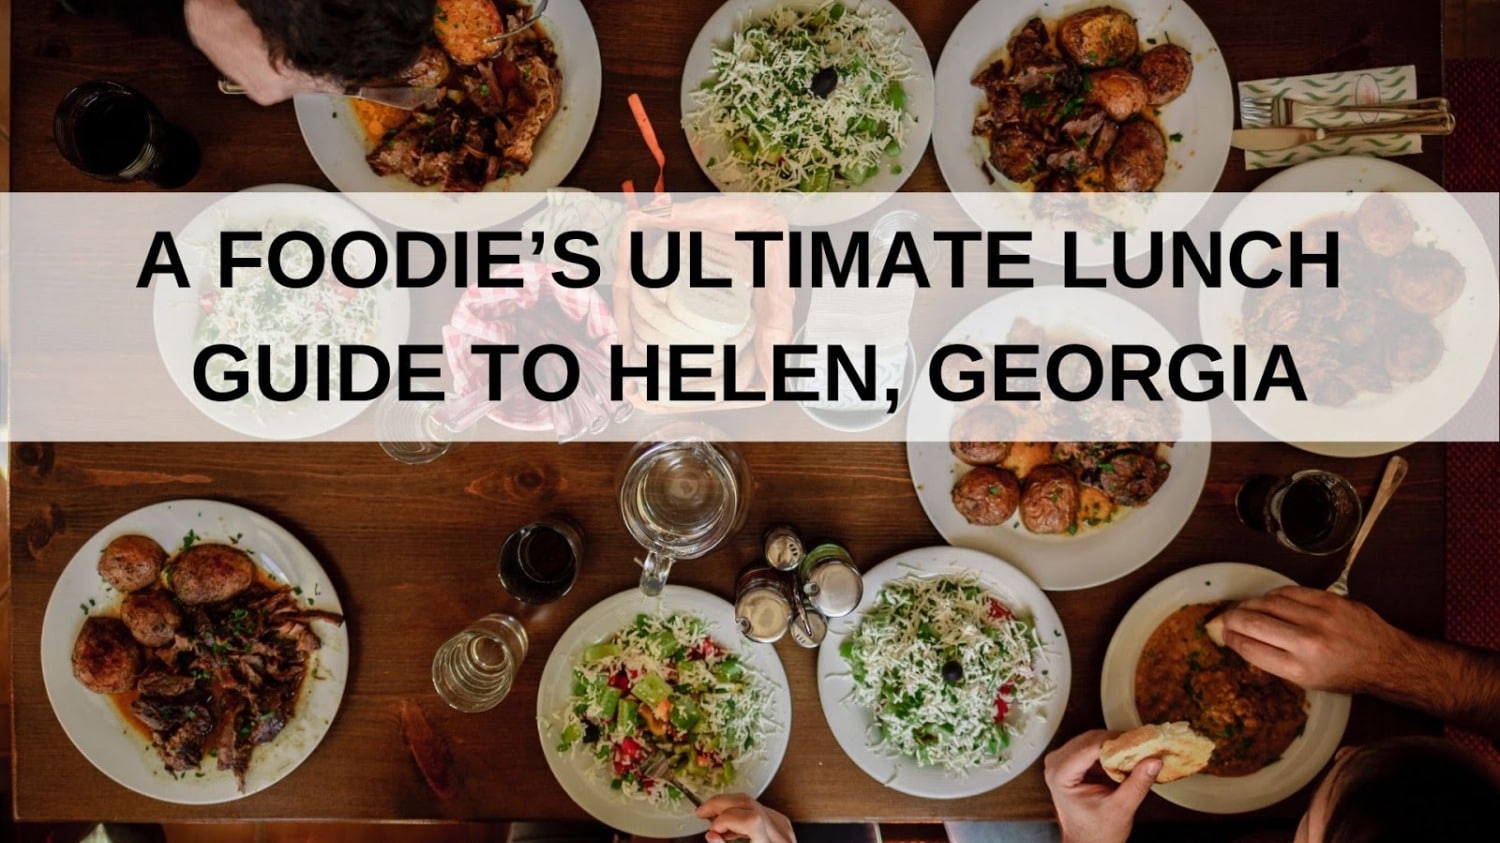 Table shot overhead with plates, banner overlay reads "A Foodie's Ultimate Lunch Guide to Helen, Georgia"